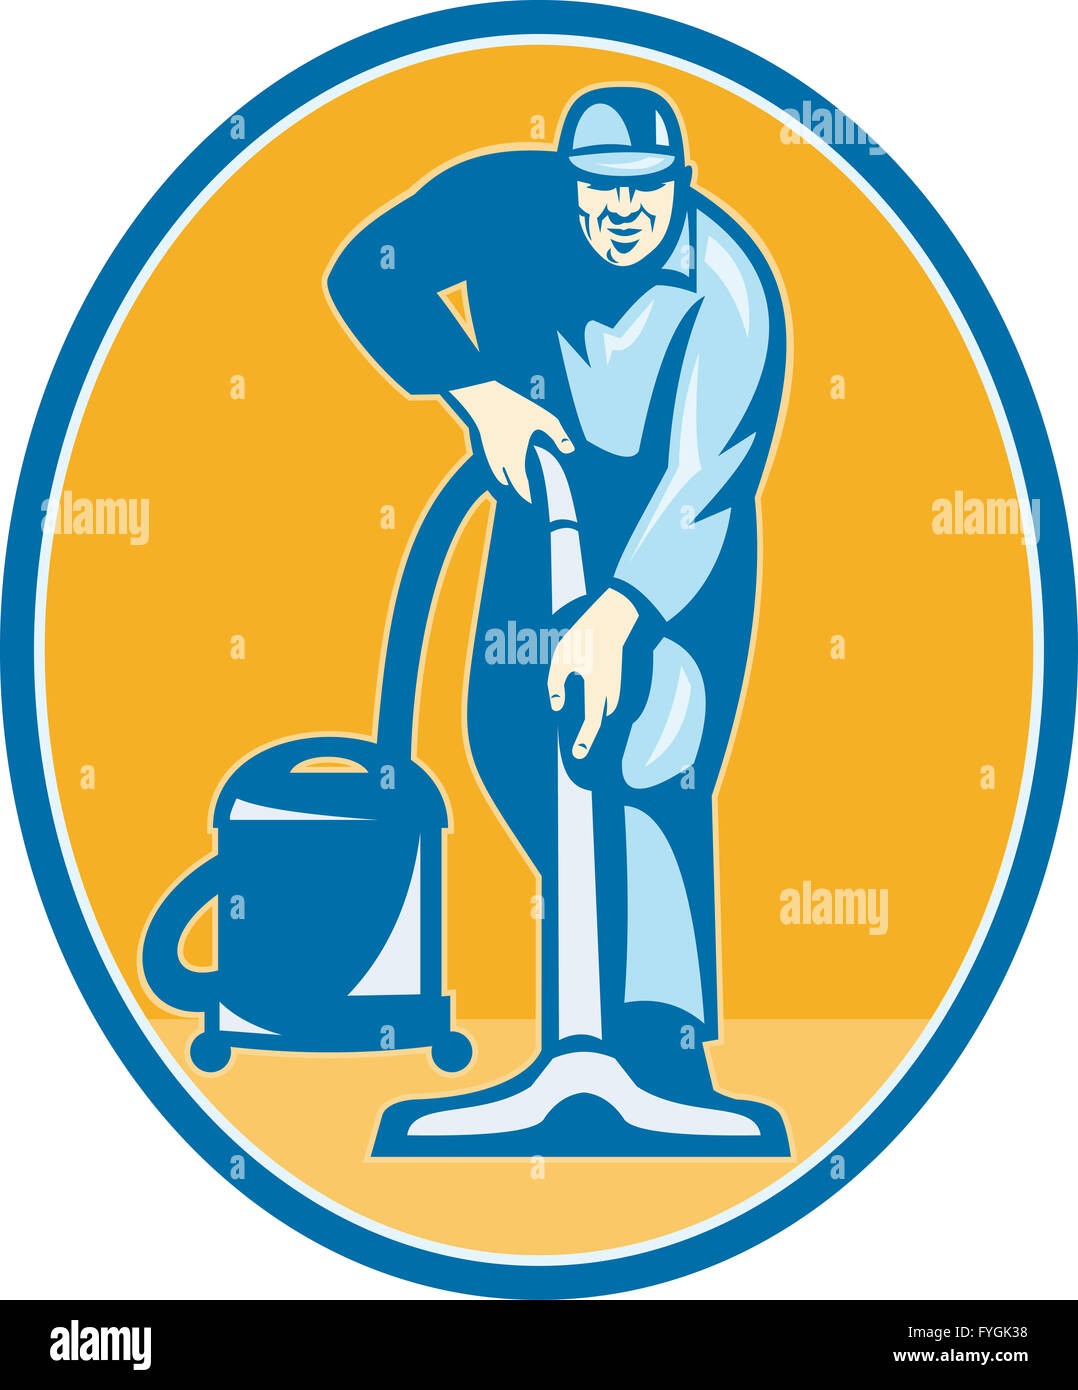 Cleaner Janitor Worker Vacuum Cleaning Stock Photo